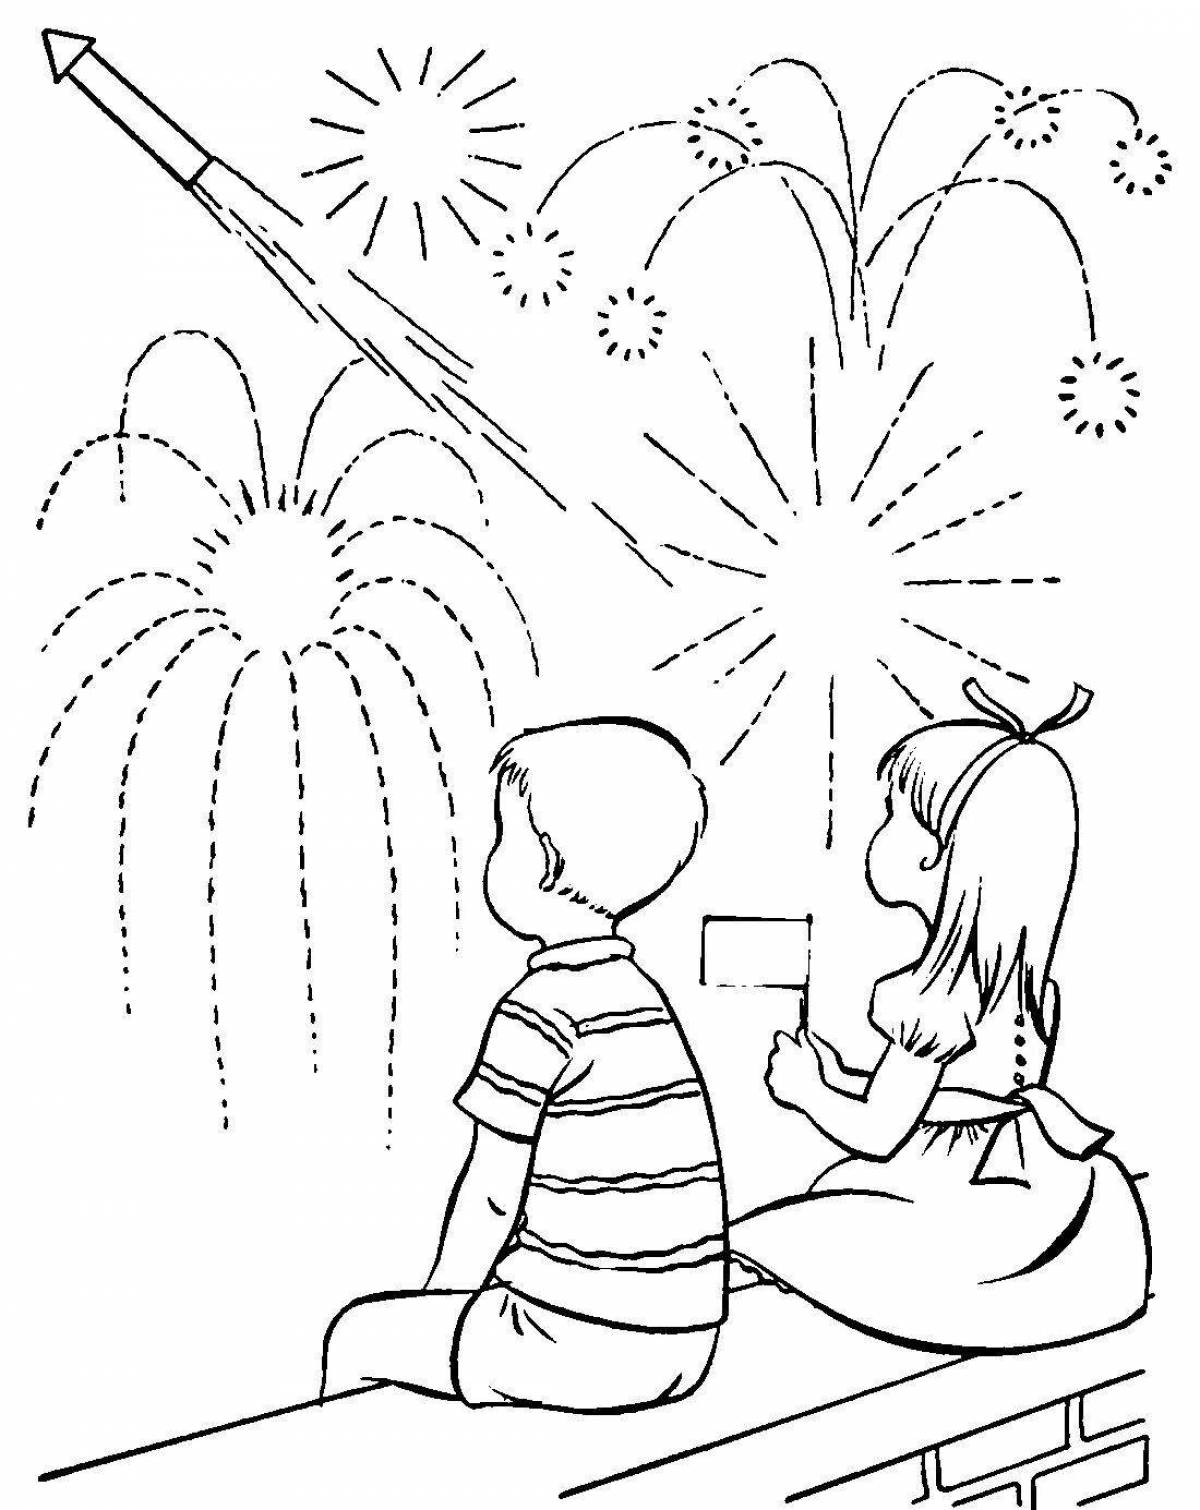 Colorful fireworks playful coloring book for children 3-4 years old